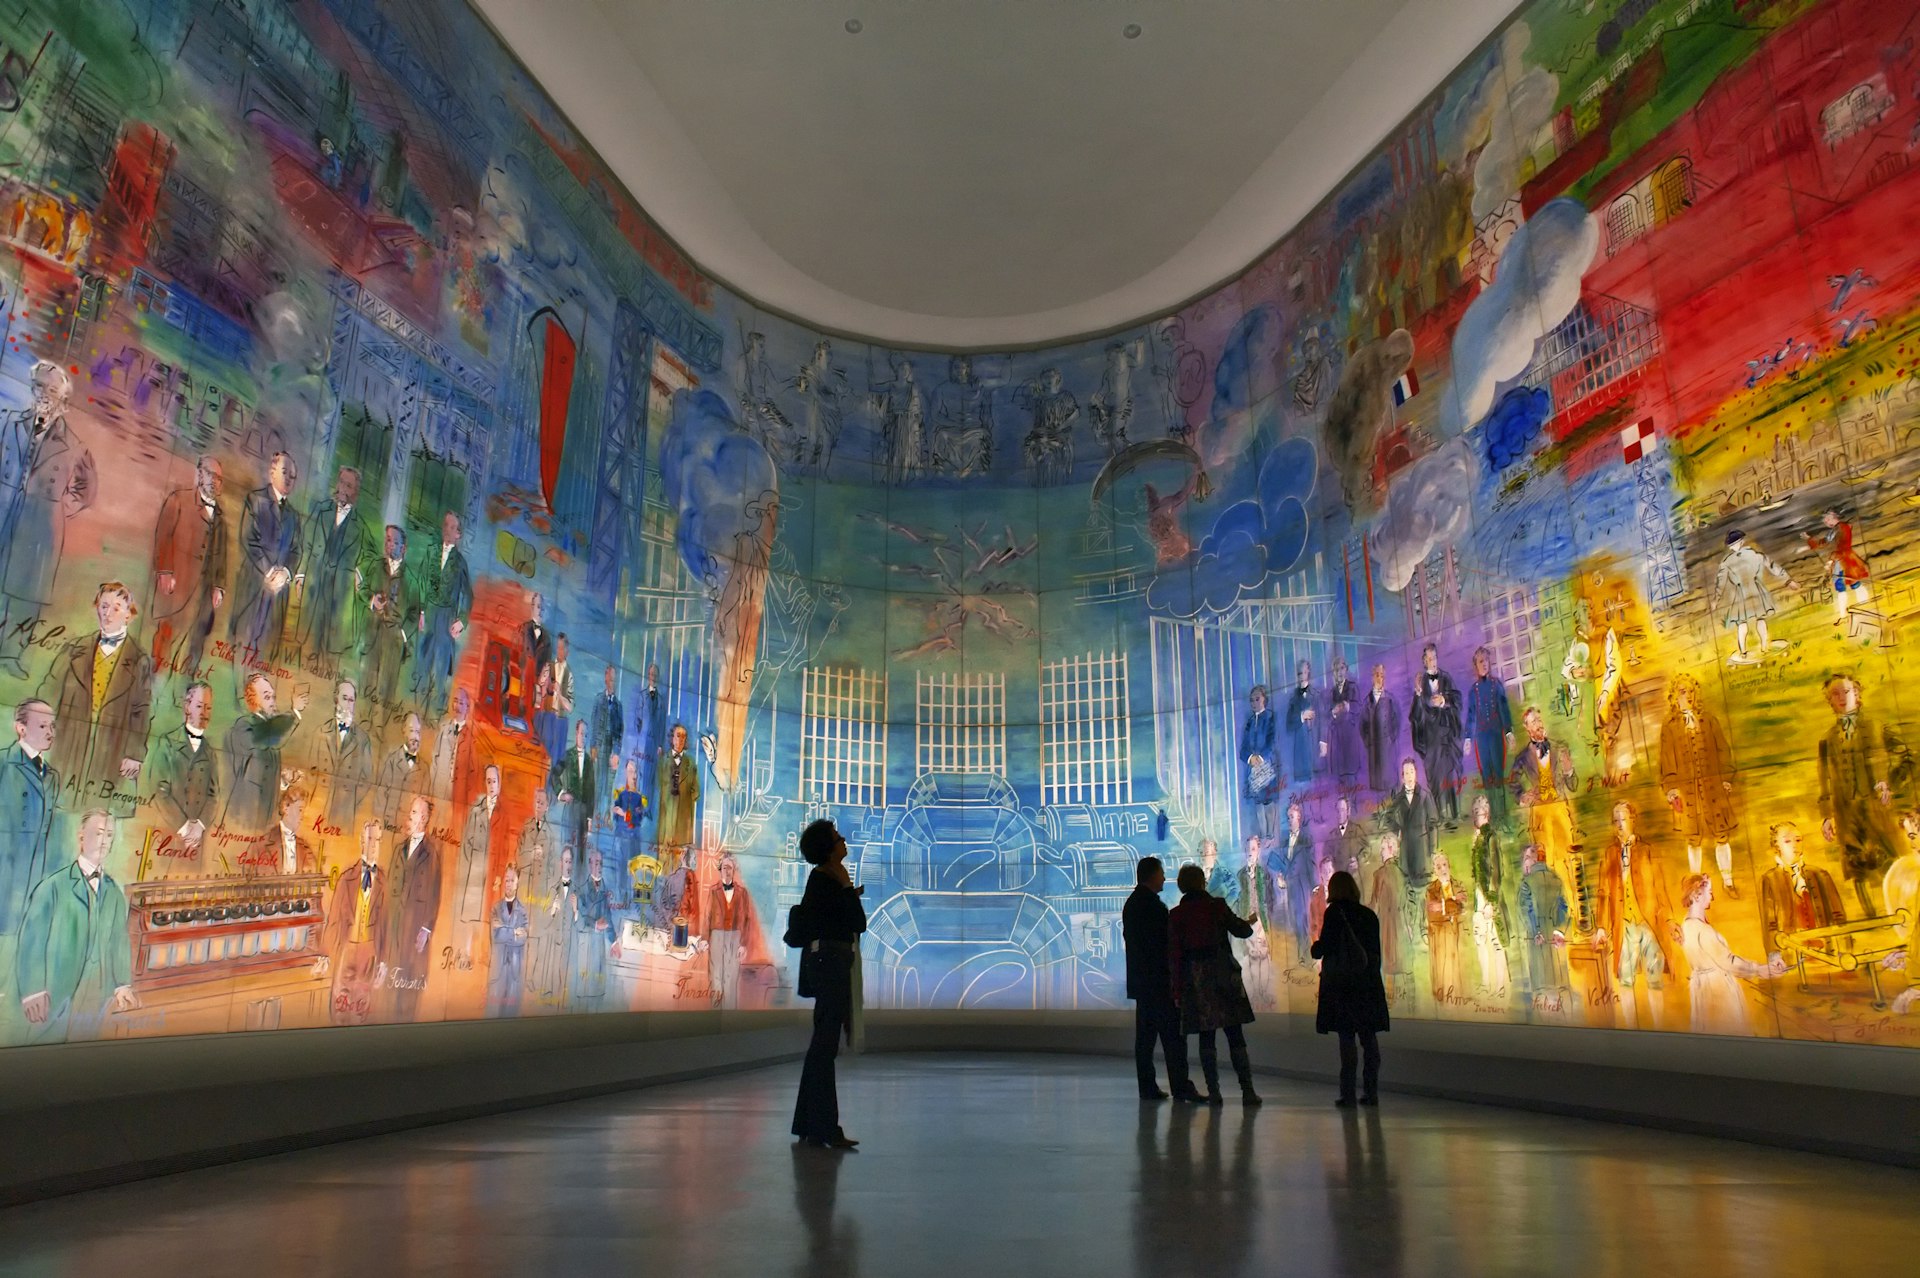 A vast room with walls backlit showing a mural